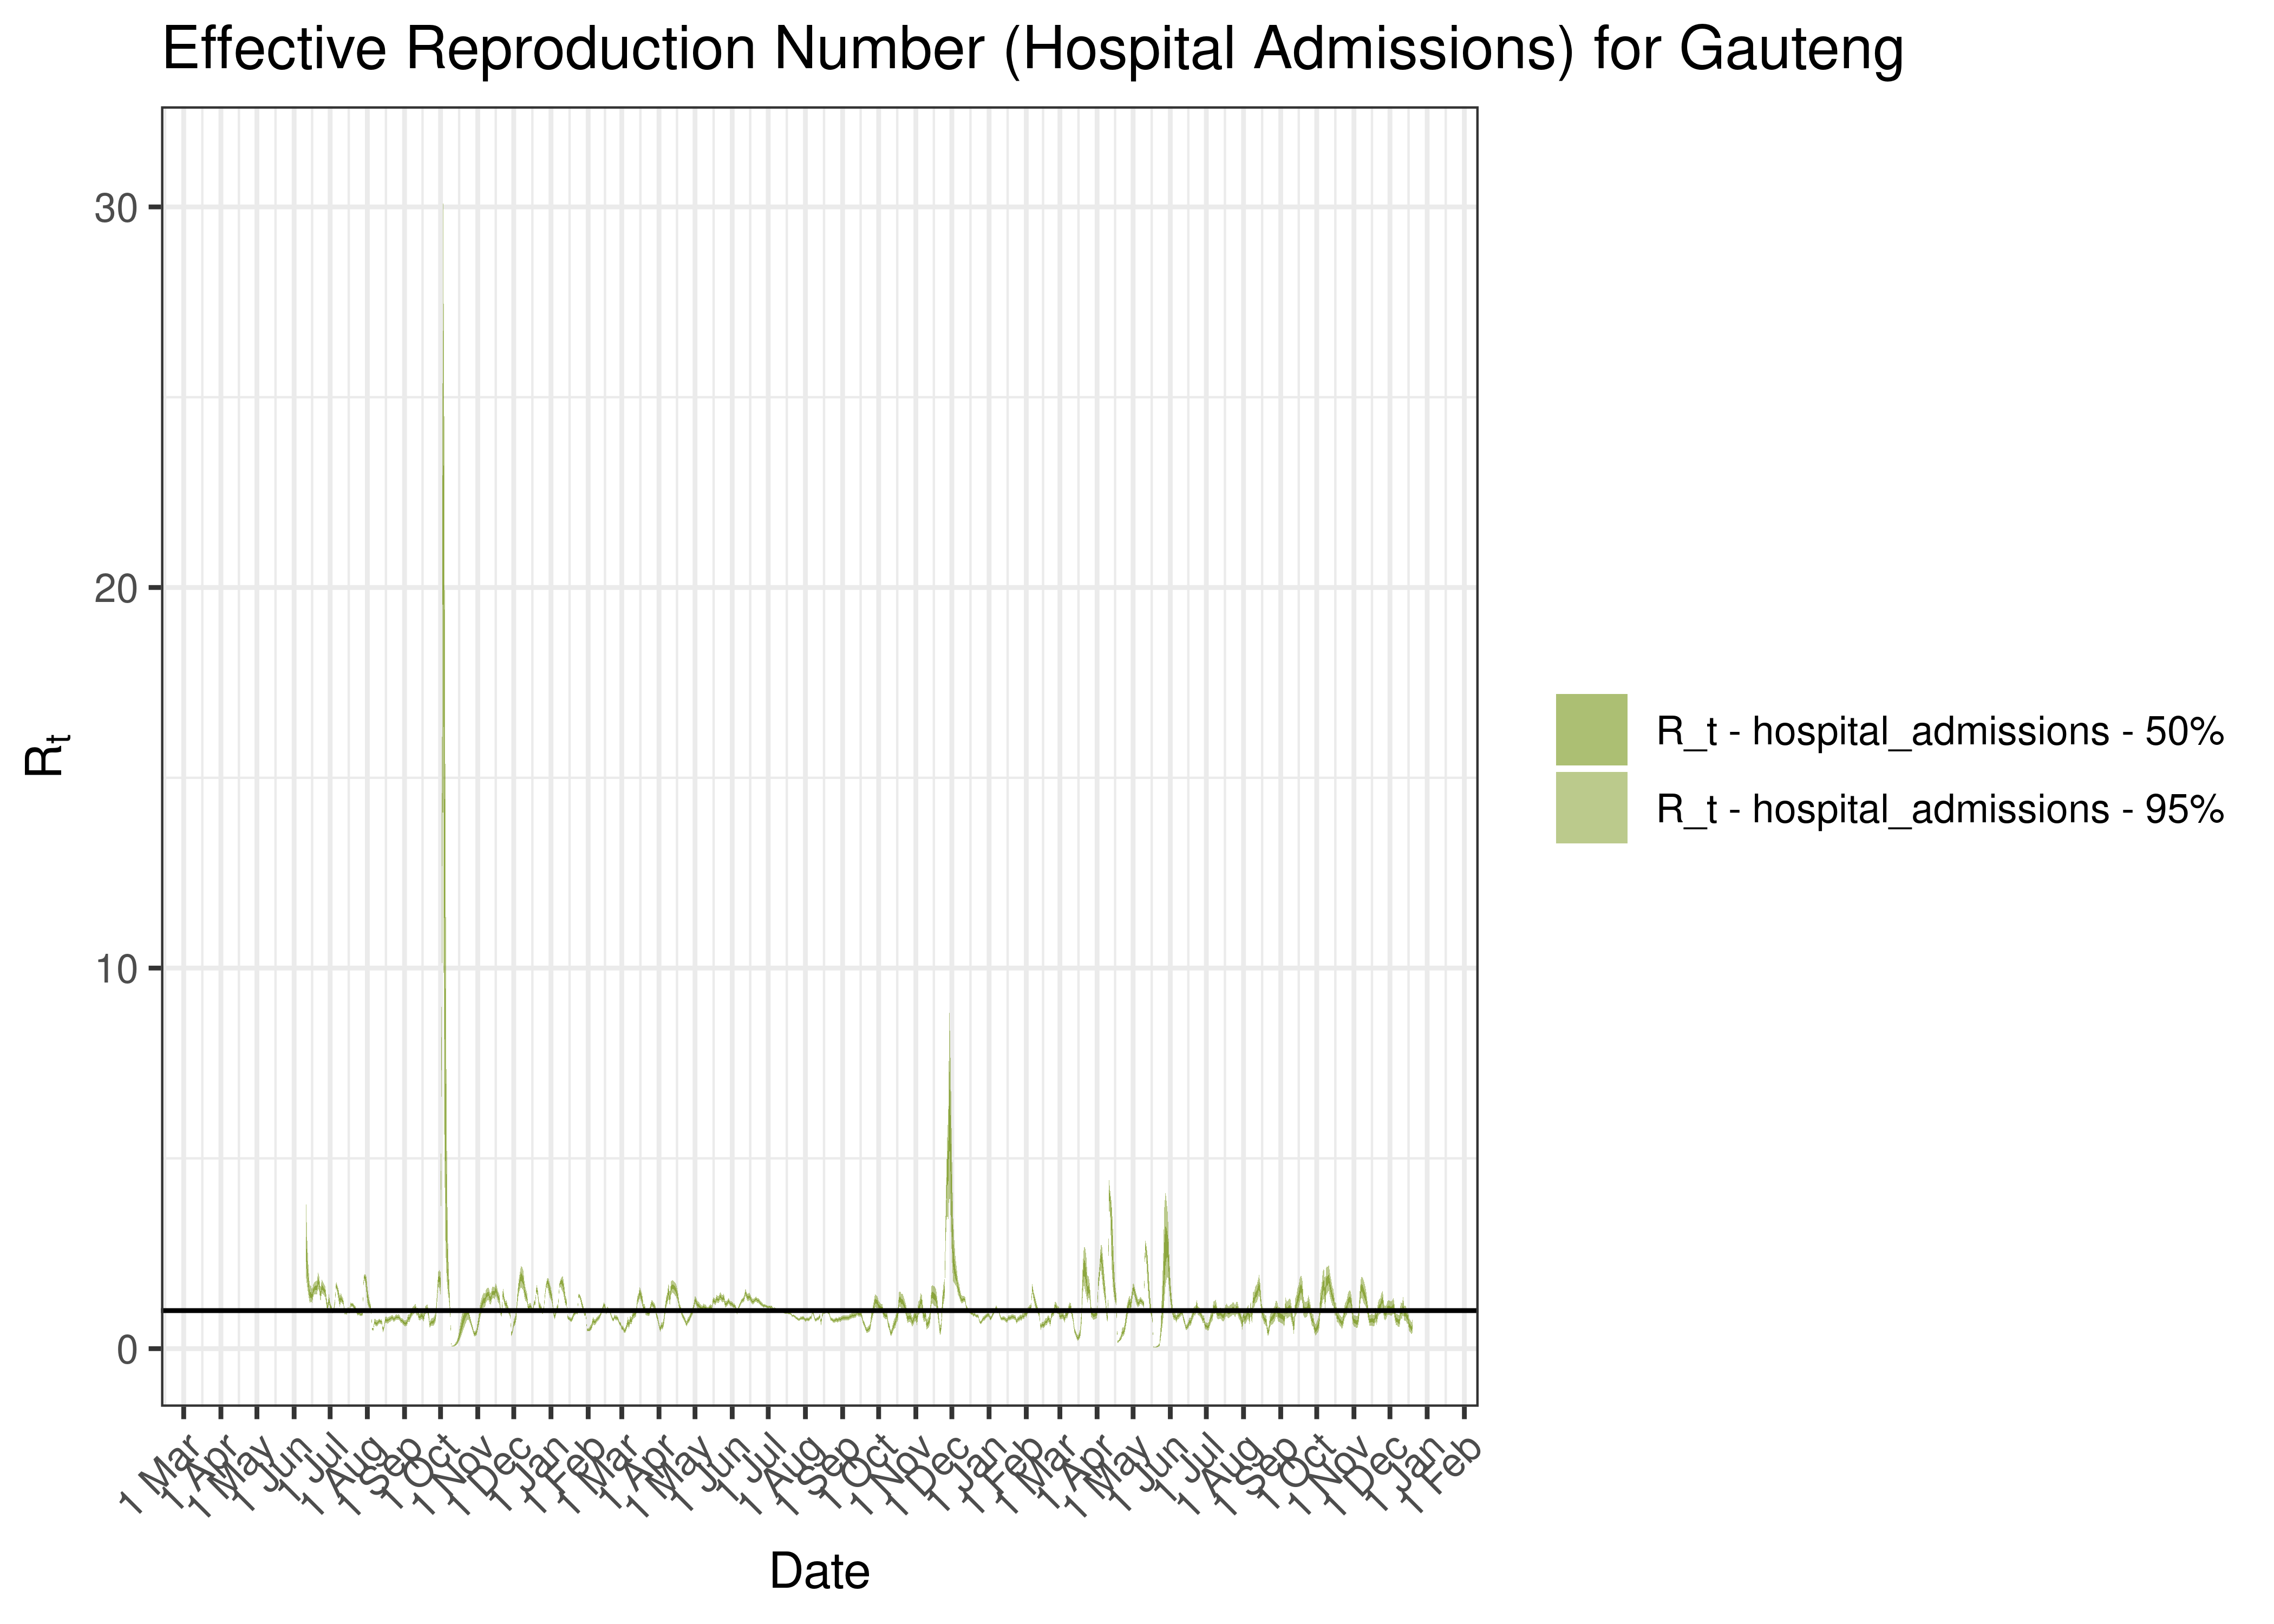 Estimated Effective Reproduction Number Based on Hospital Admissions for Gauteng since 1 April 2020